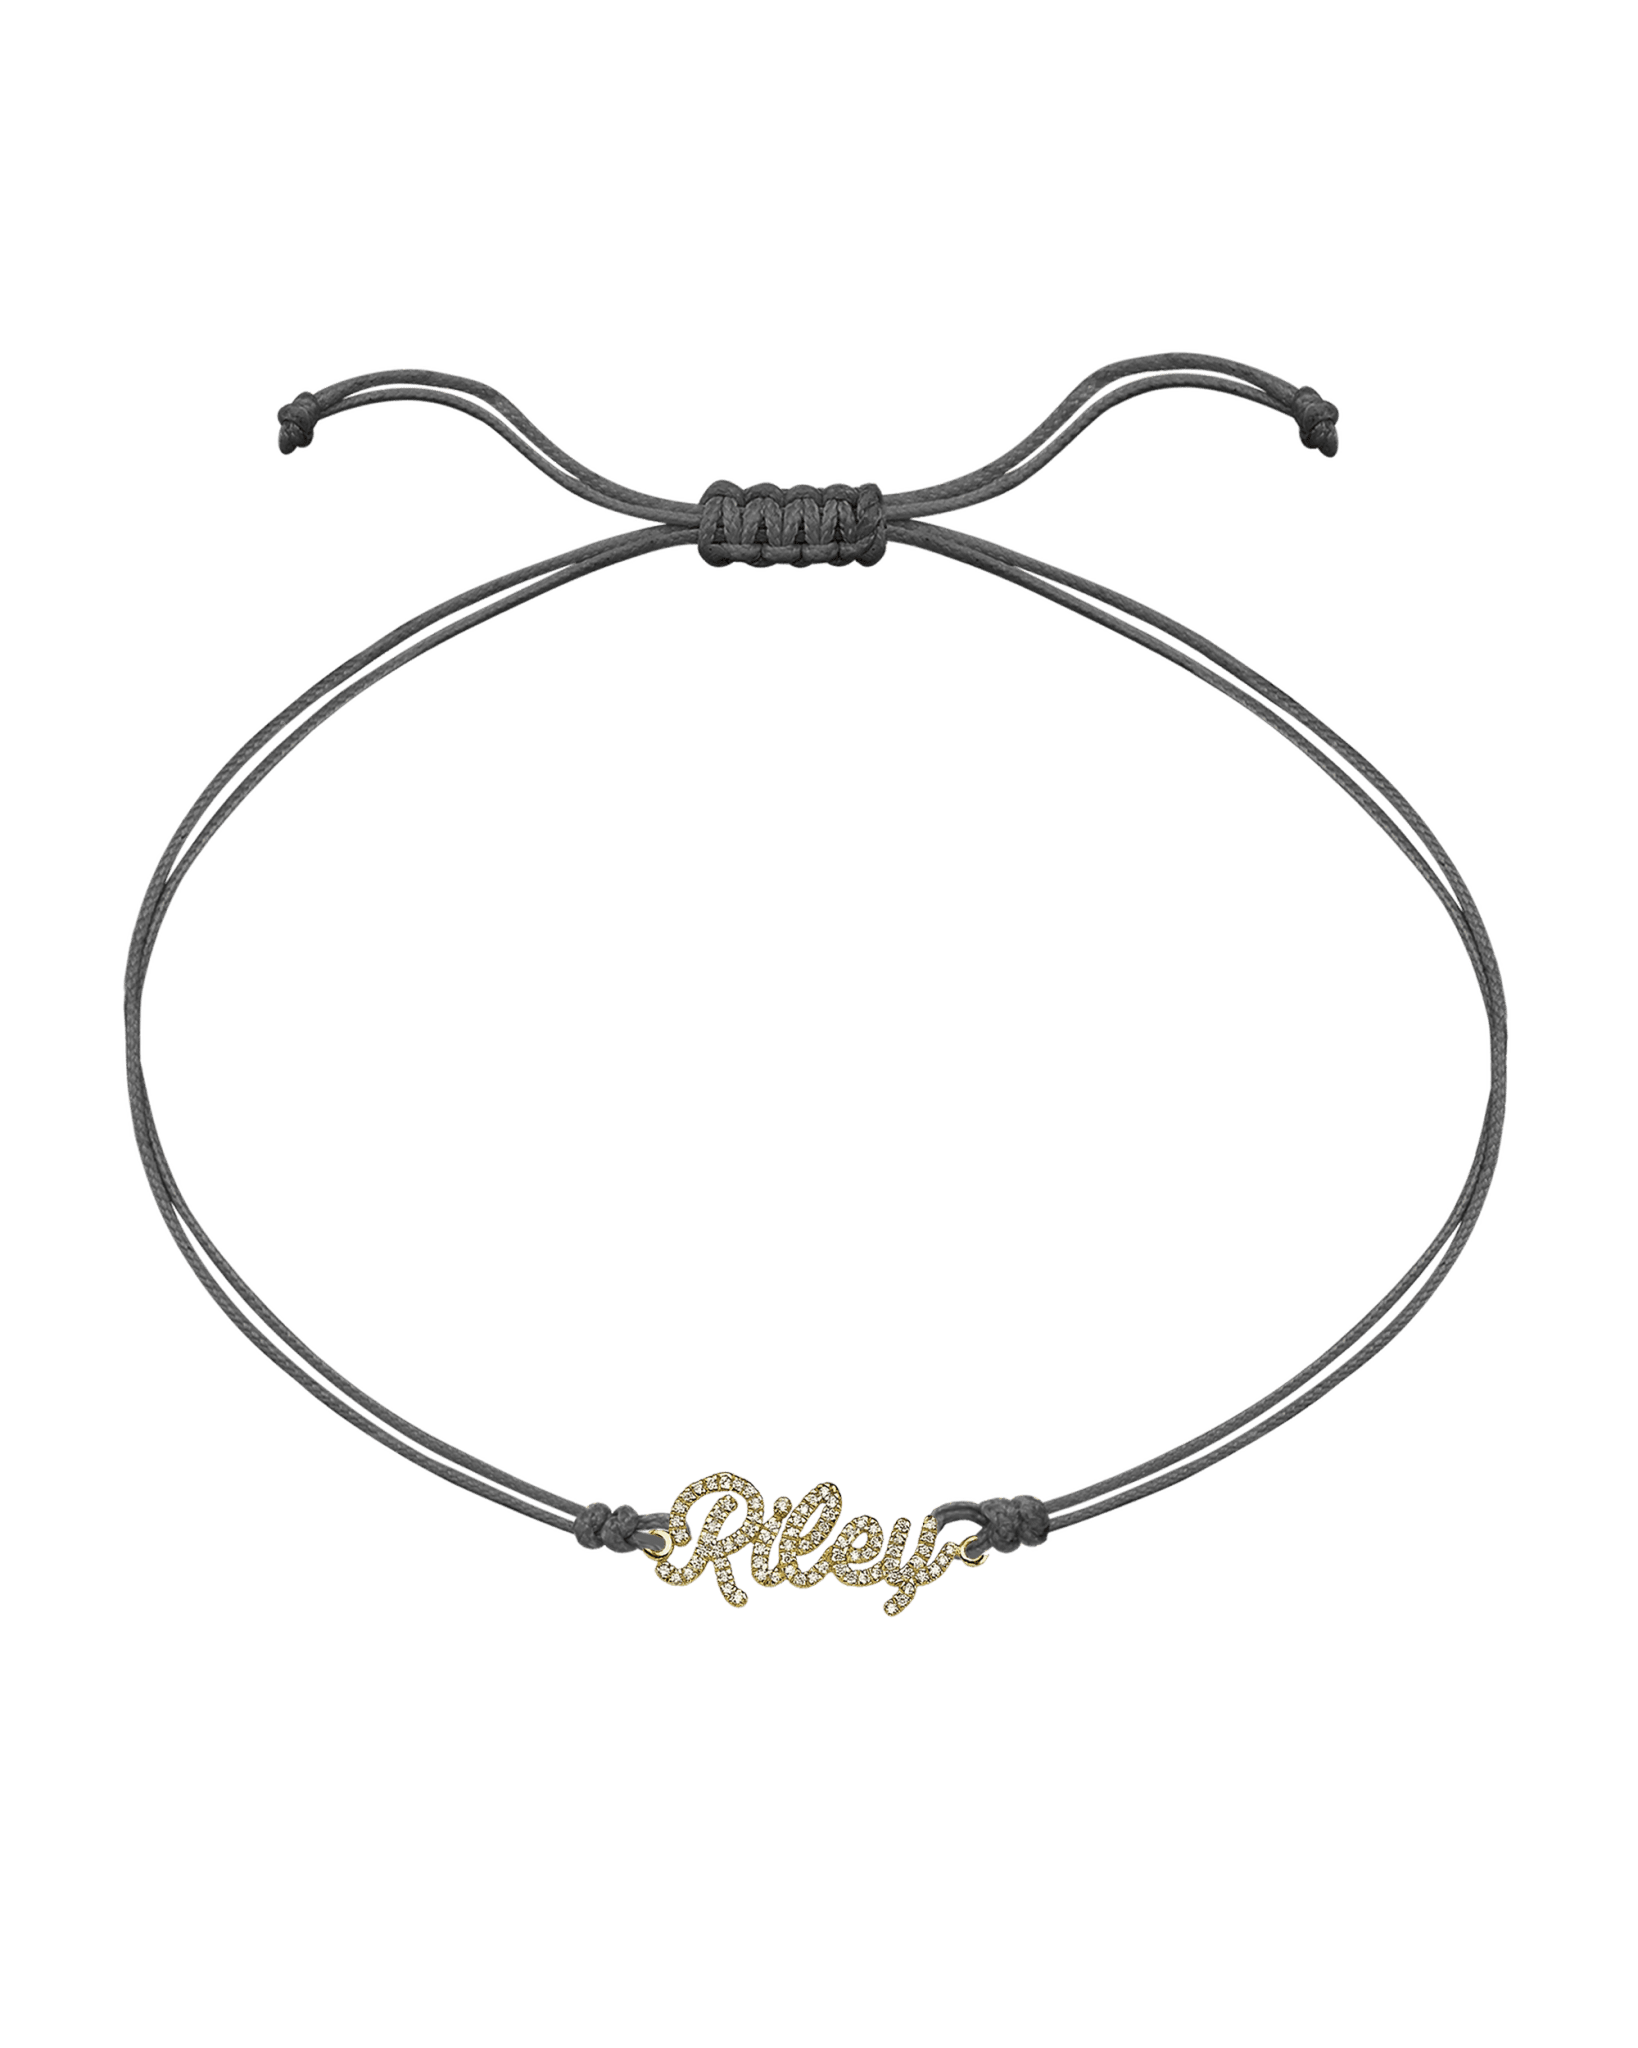 Paved Name Plate String of Love - 14K Yellow Gold Bracelet 14K Solid Gold Grey 1 